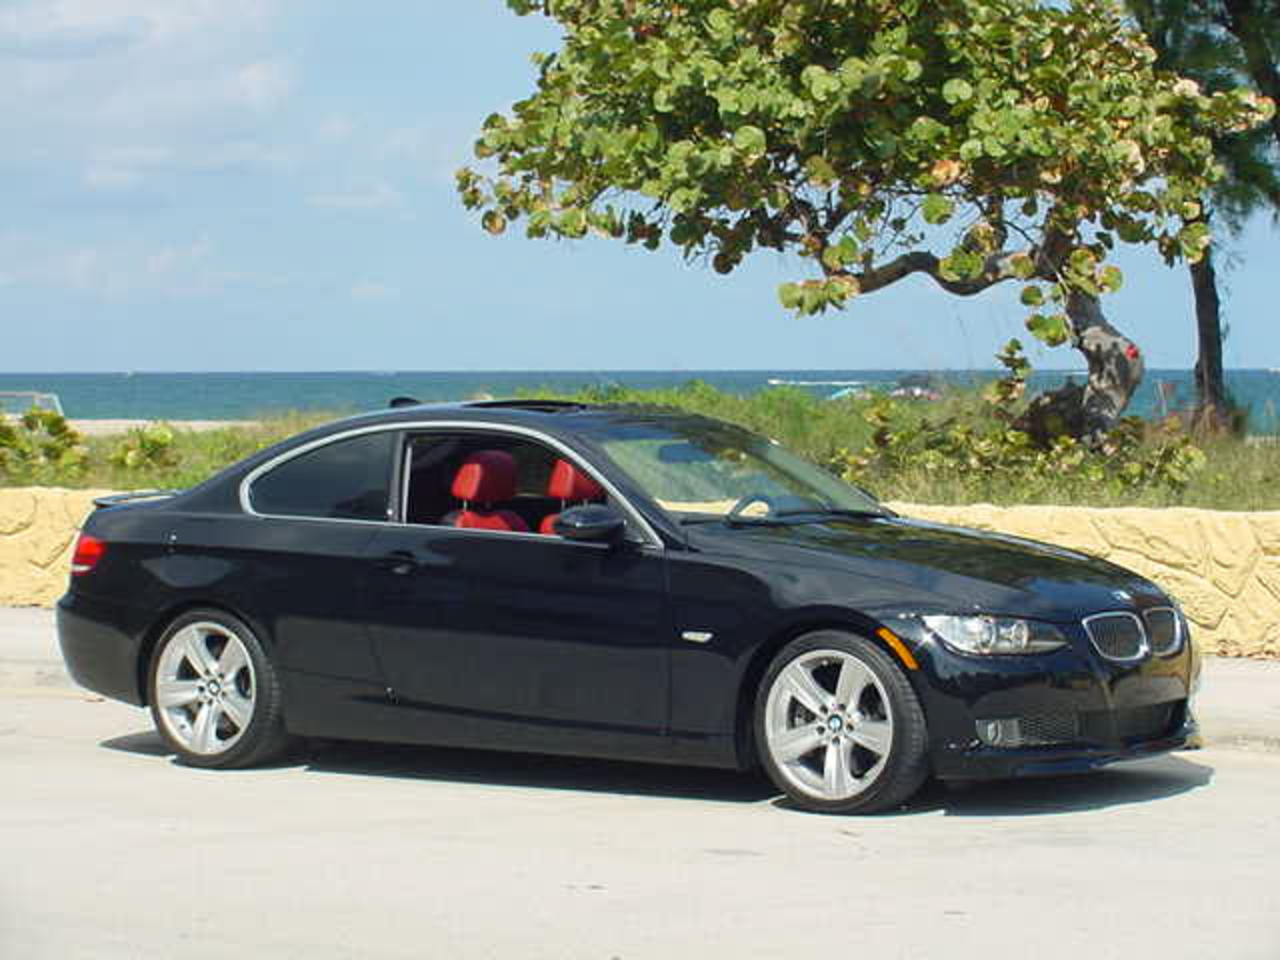 2008 BMW 335i Coupe | Flickr - Photo Sharing!